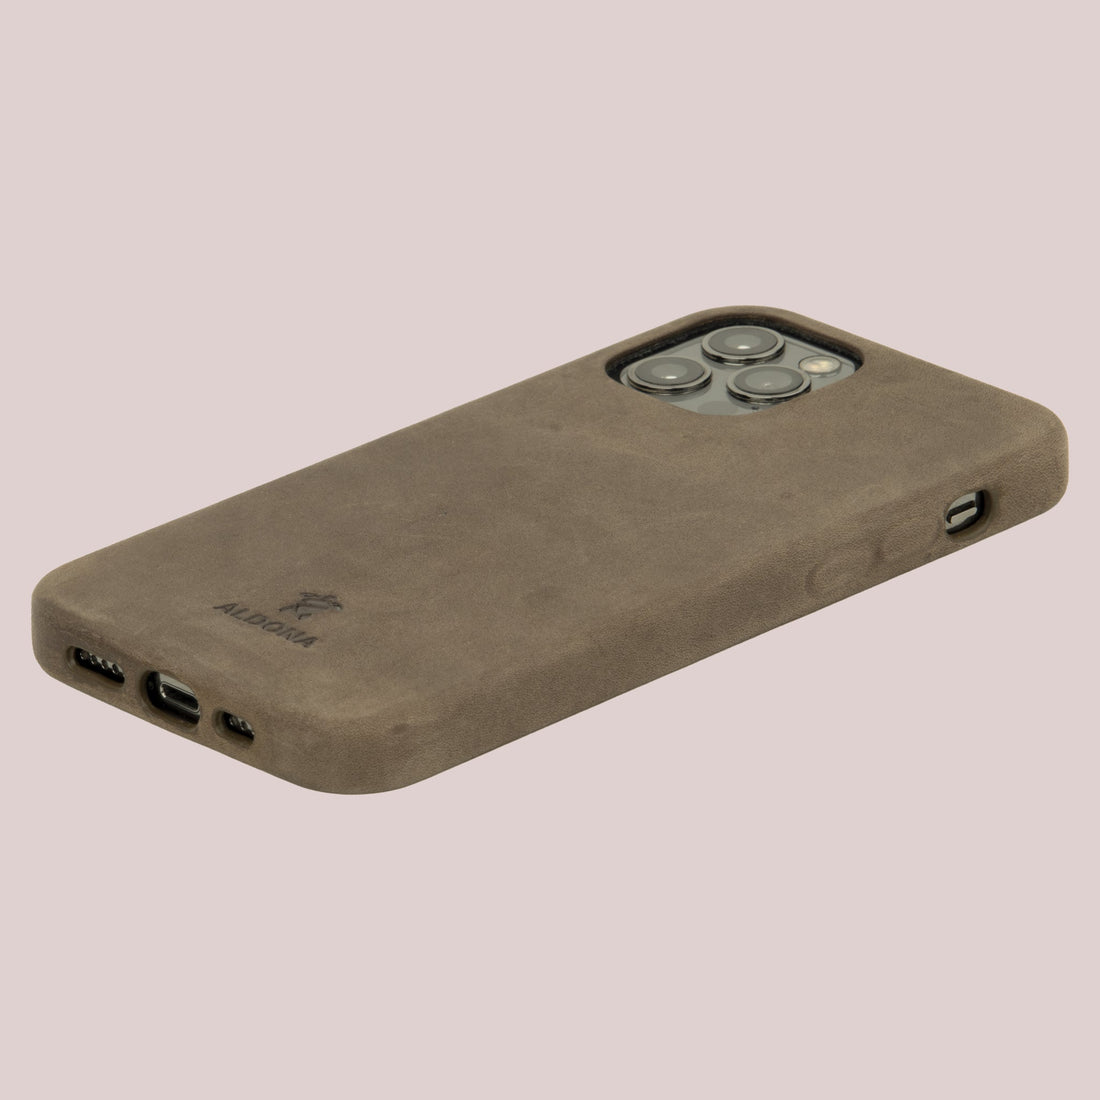 Kalon Case for iPhone 12 Pro Max with MagSafe Compatibility - Burnt Tobacco